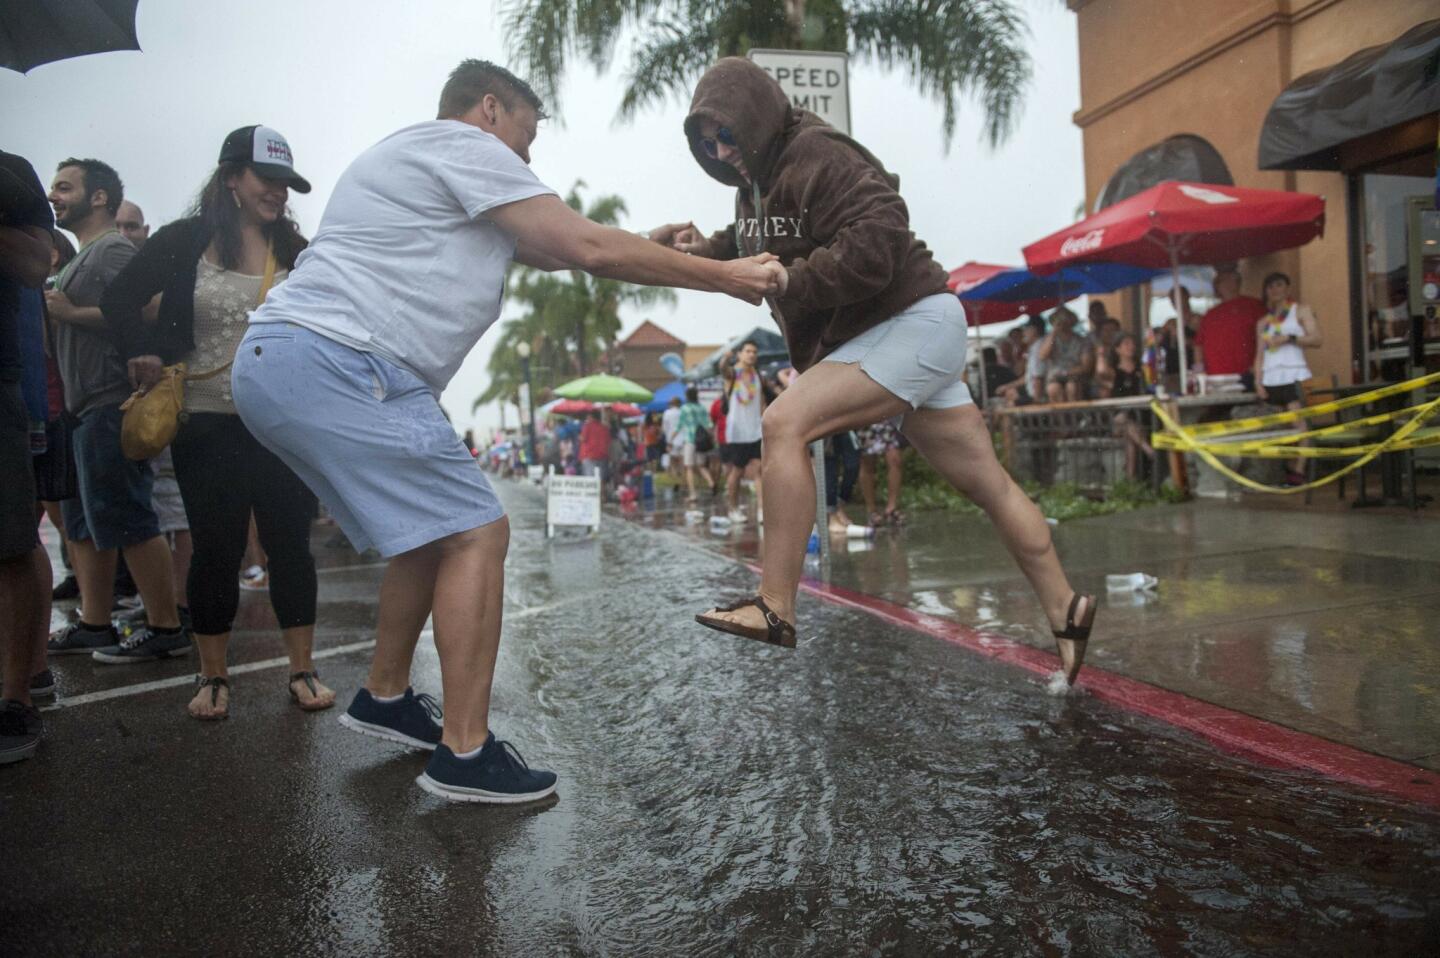 Jess Hoinacki helps Melisa Flores cross the gushing storm drains on University Avenue during the San Diego Pride Parade.